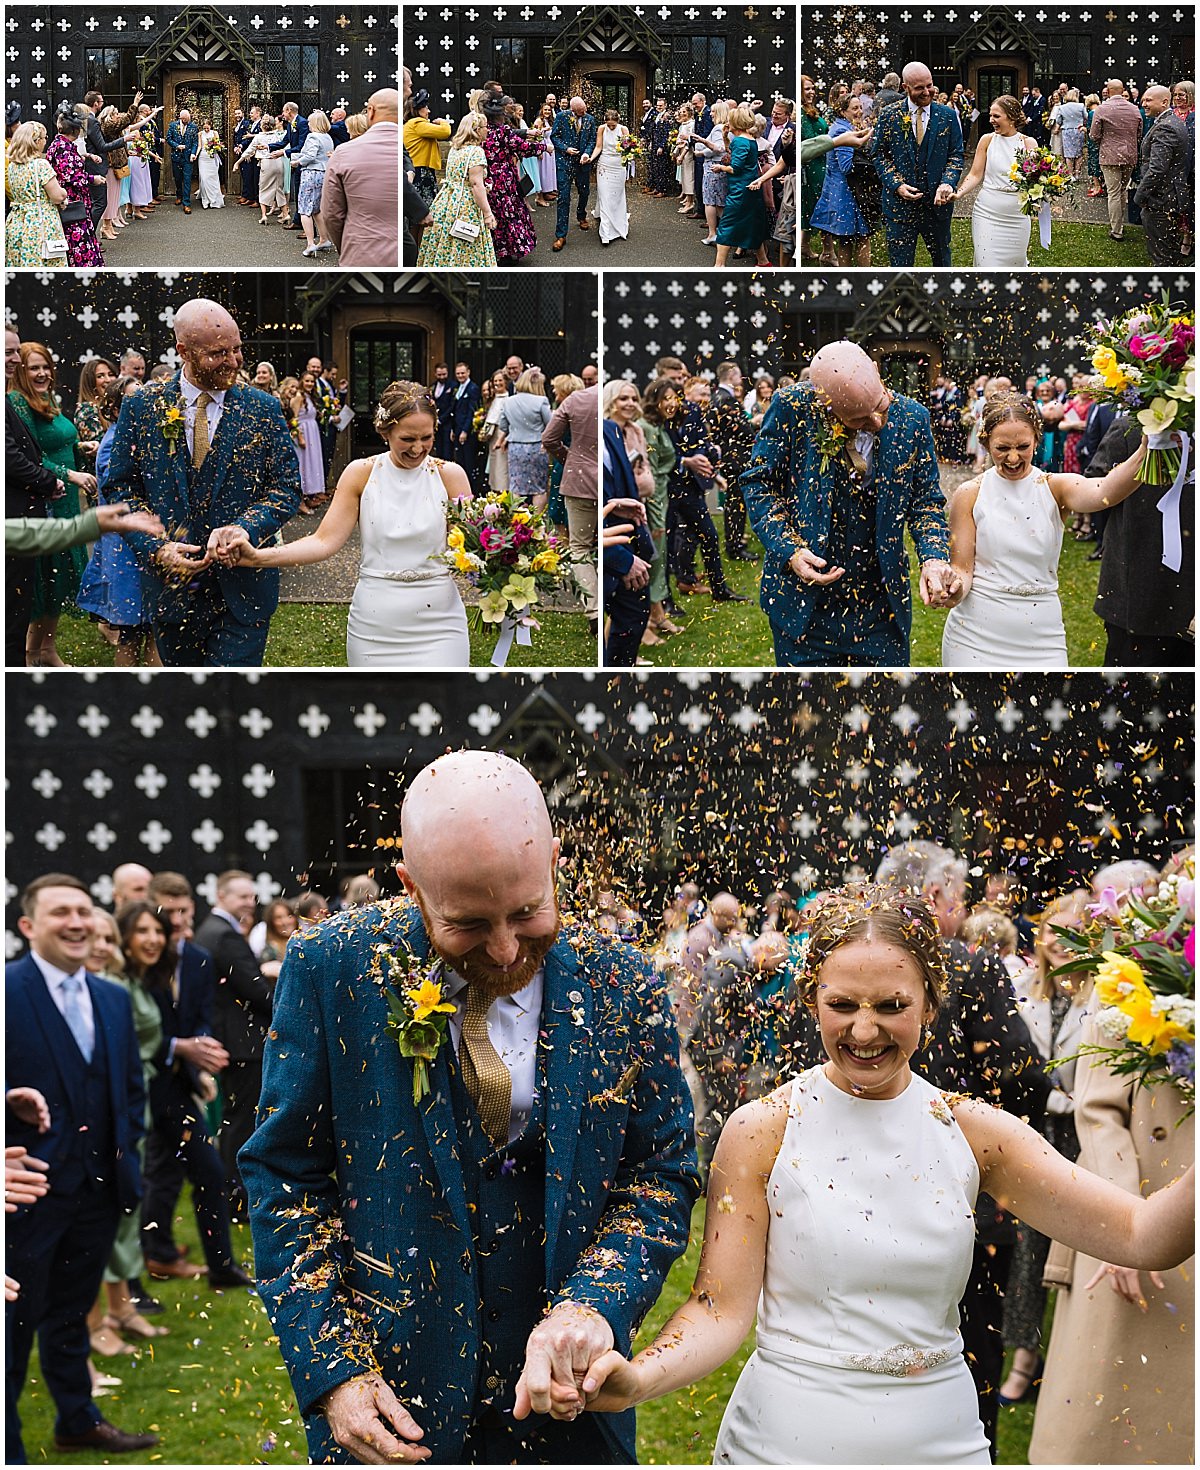 A collage of photos capturing a wedding couple smiling as guests throw flower petals at them during a celebration outside a gothic-style building at Samlesbury Hall.